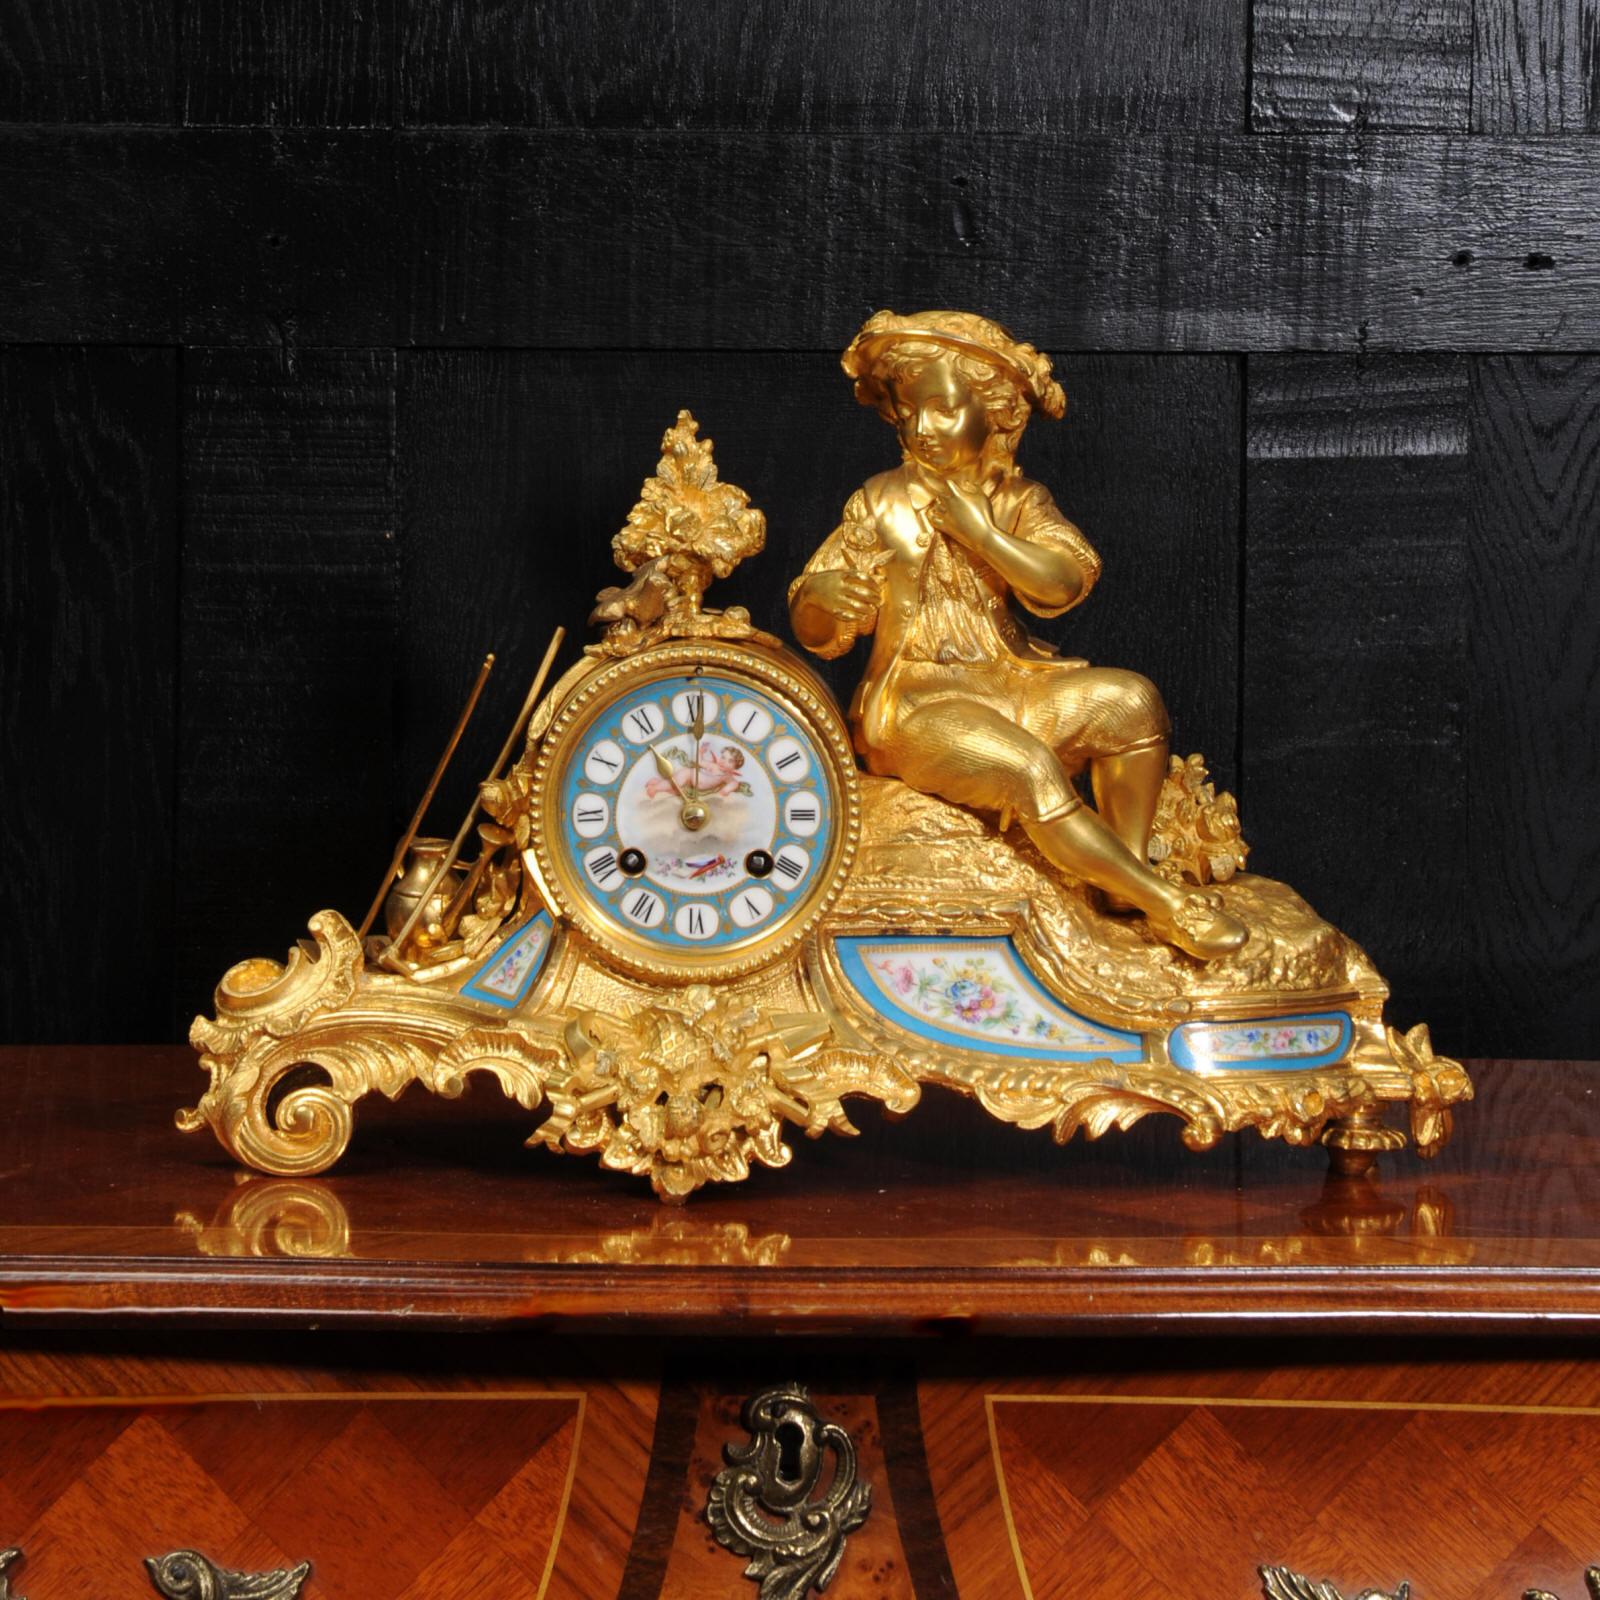 A beautiful and early antique French clock depicting a gardener taking a moment's rest with a song bird to his side. It is finely modelled in ormolu (finely gilded bronze) and is mounted with exquisite Sèvres style porcelain. These have delicately